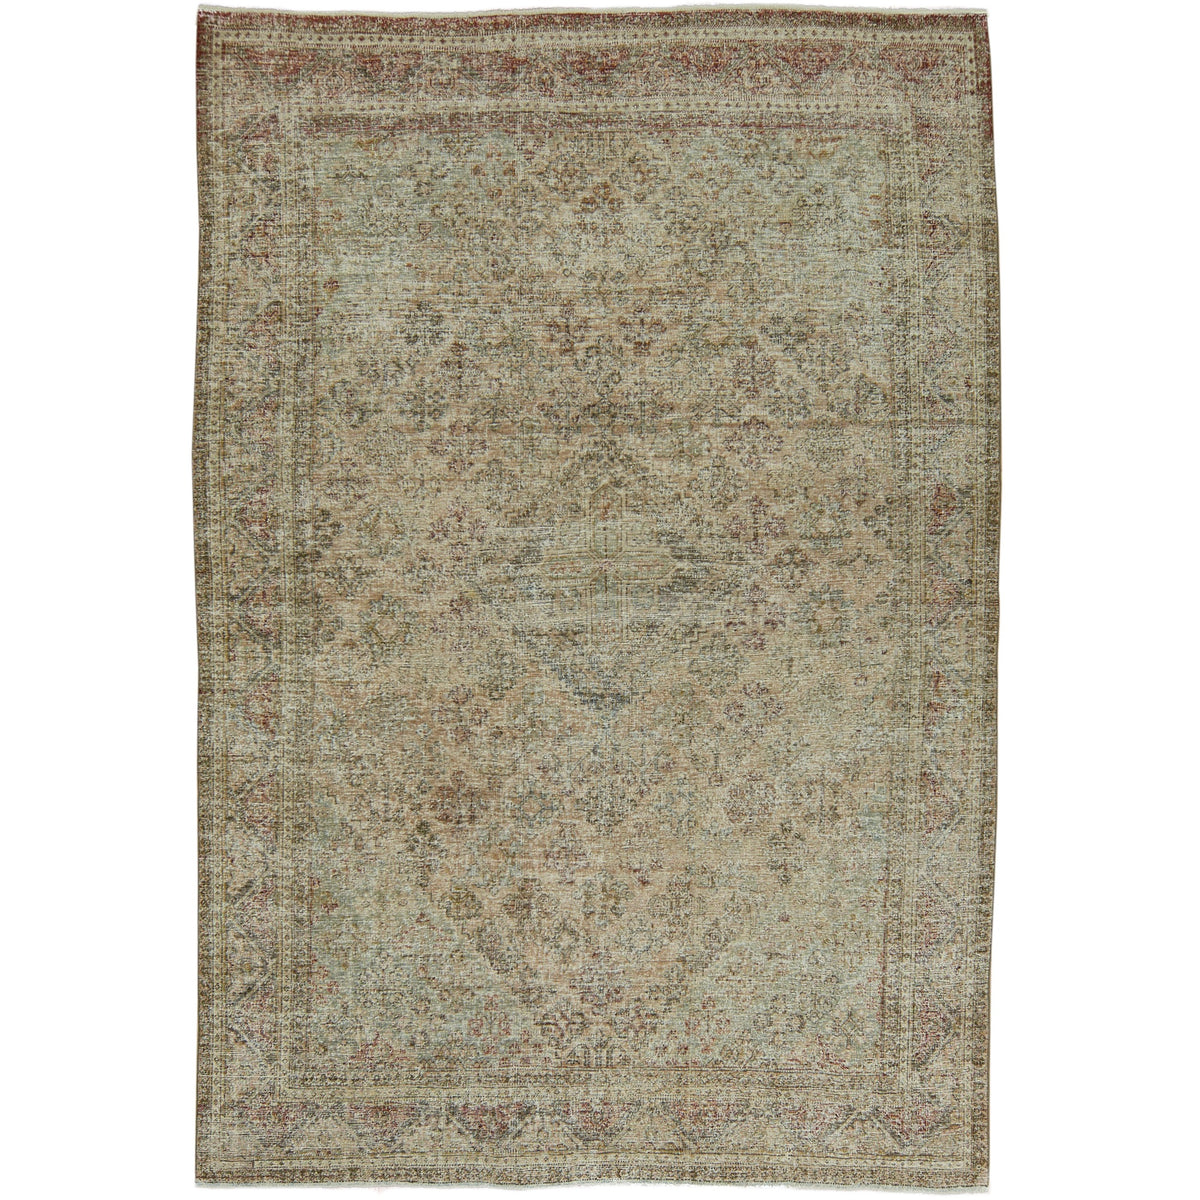 Kaitrionaugh - Vintage Persian Rug Excellence | Kuden Rugs